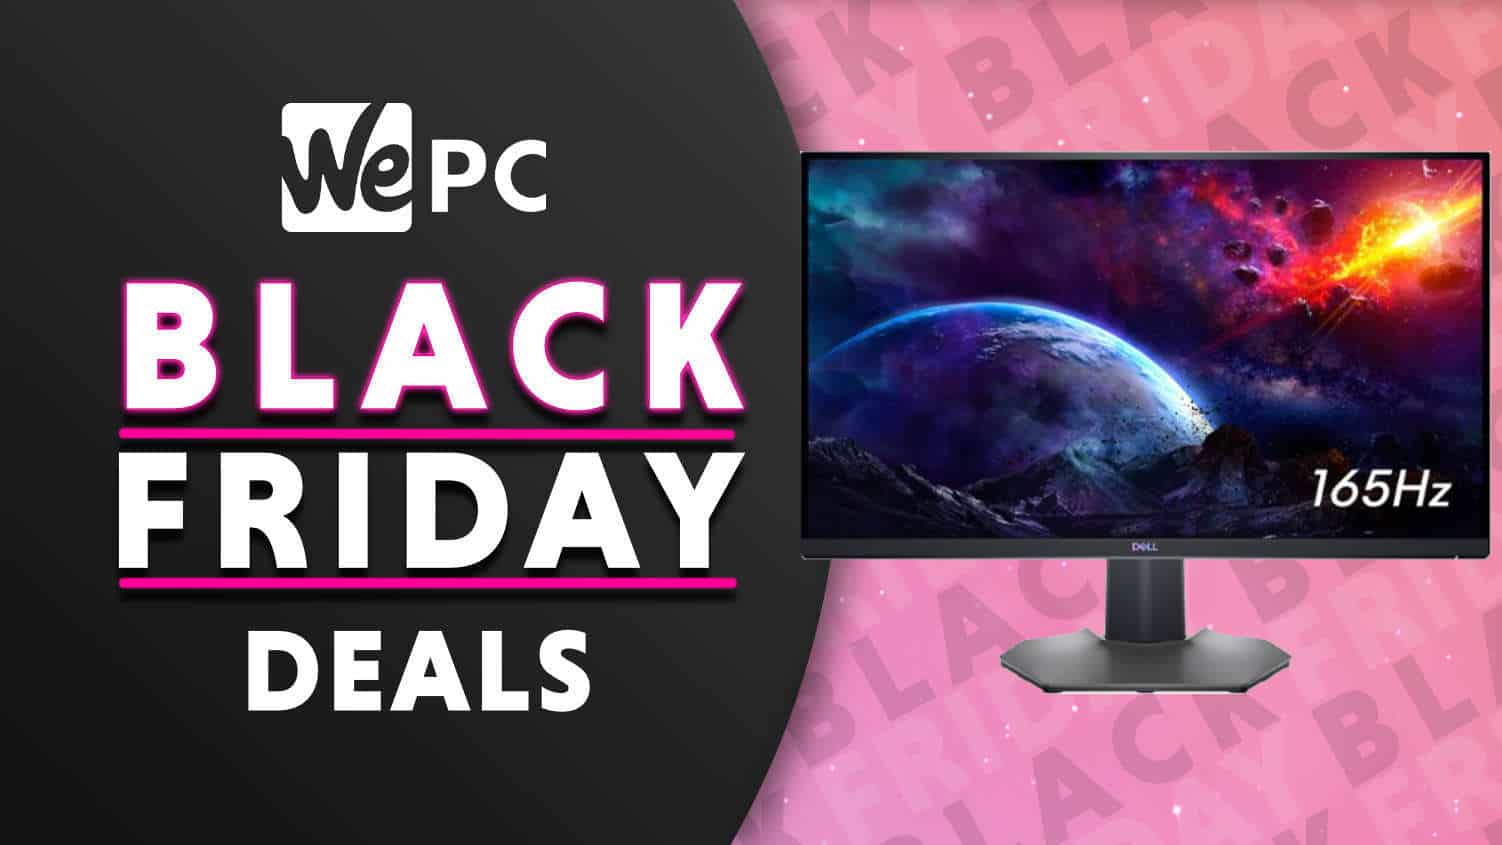 Save 27% on a Dell S2721DGF early Black Friday 2021 deals | WePC